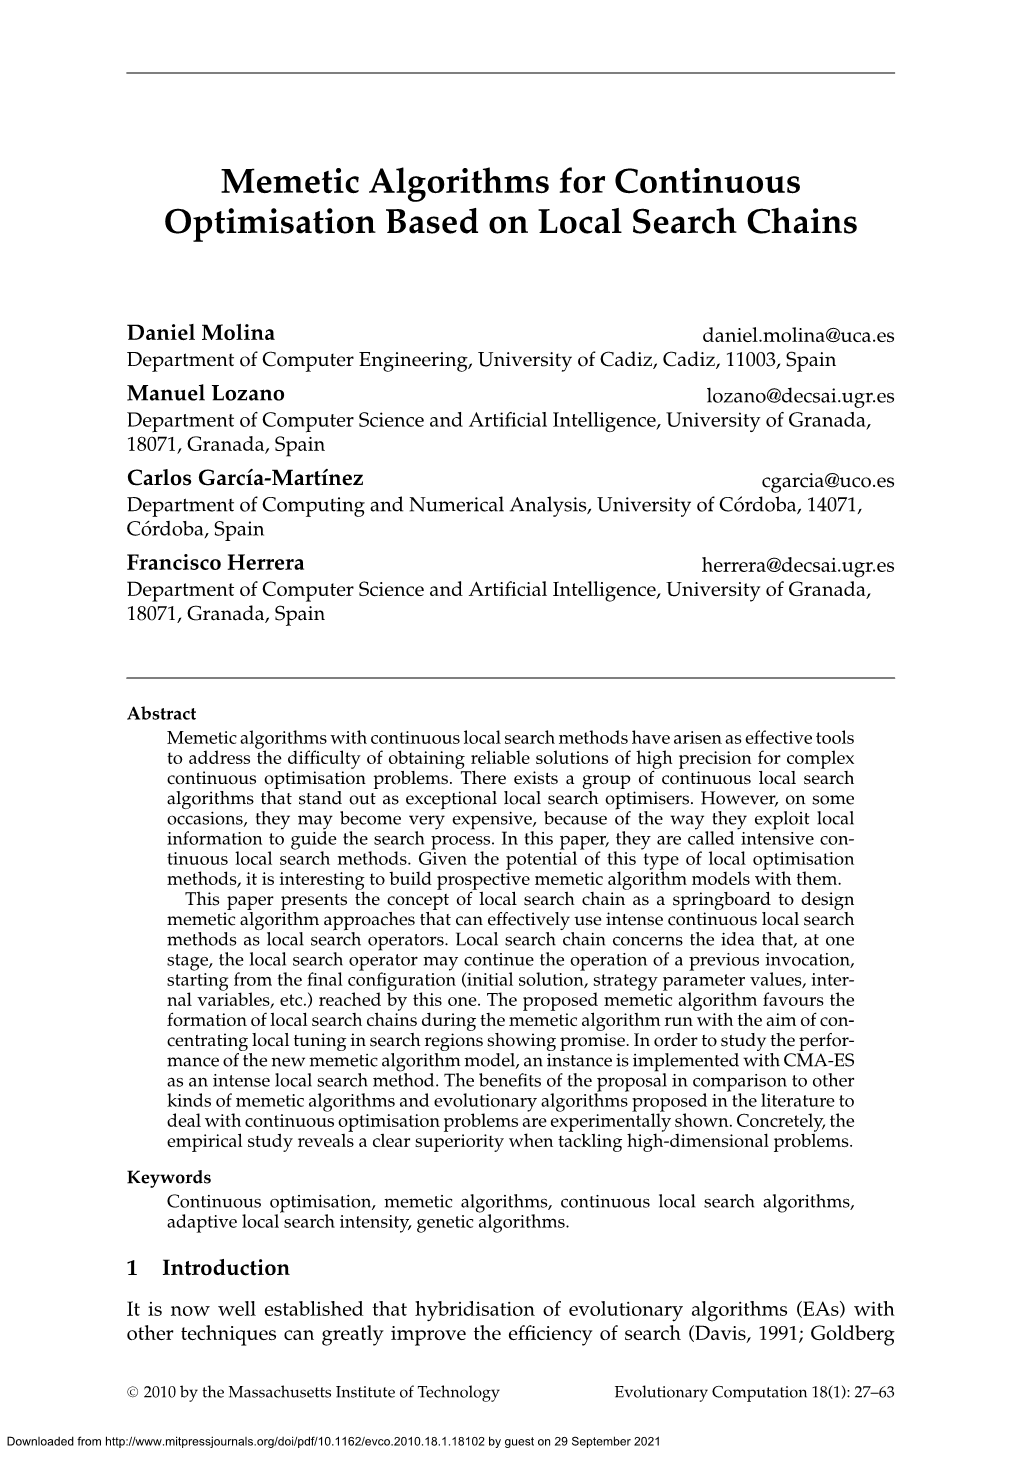 Memetic Algorithms for Continuous Optimisation Based on Local Search Chains